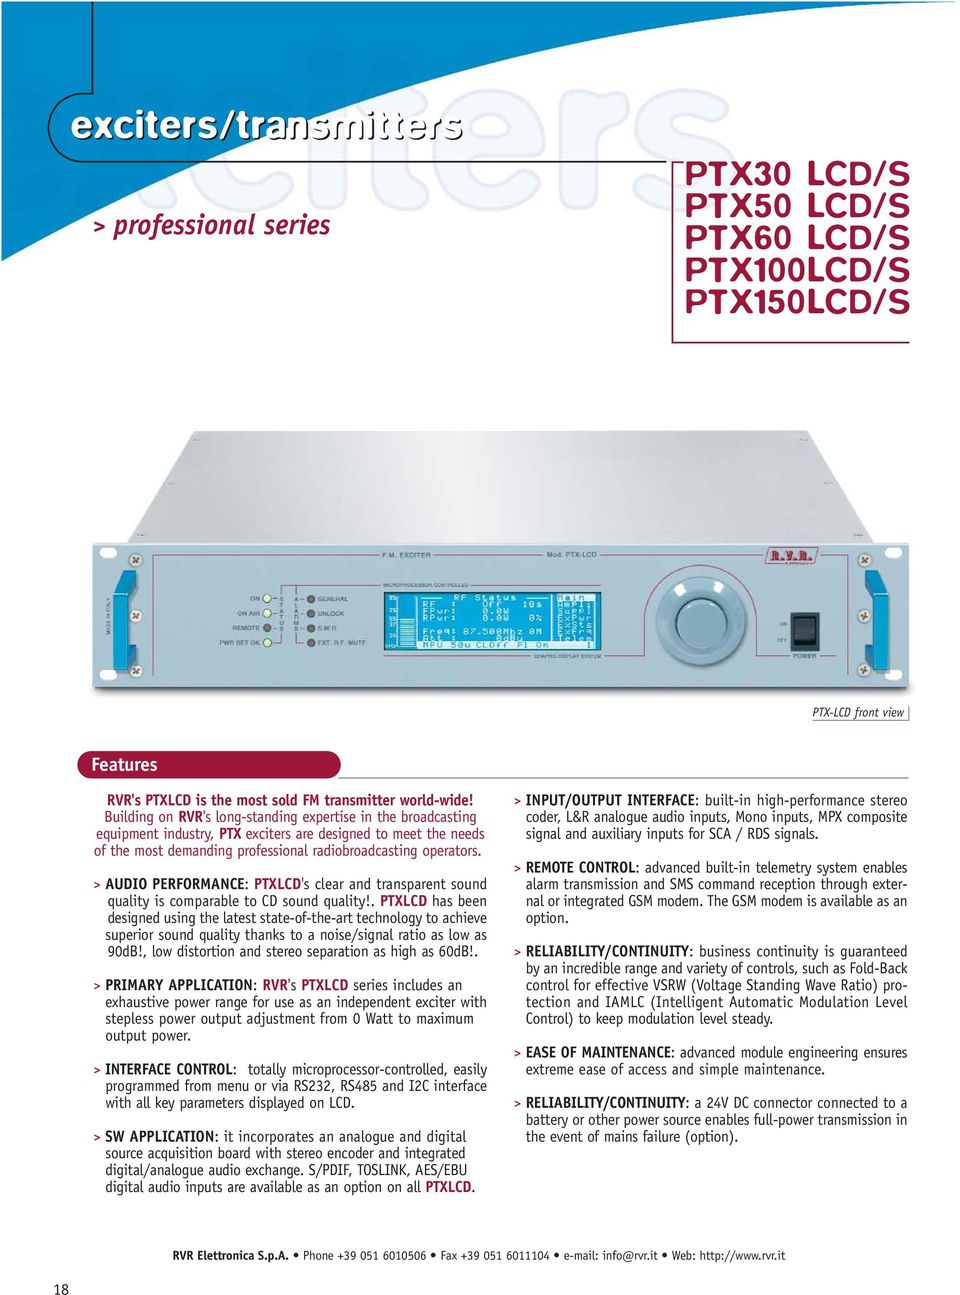 AUDIO PERFORMANCE: PTXLCD's clear and transparent sound quality is comparable to CD sound quality!